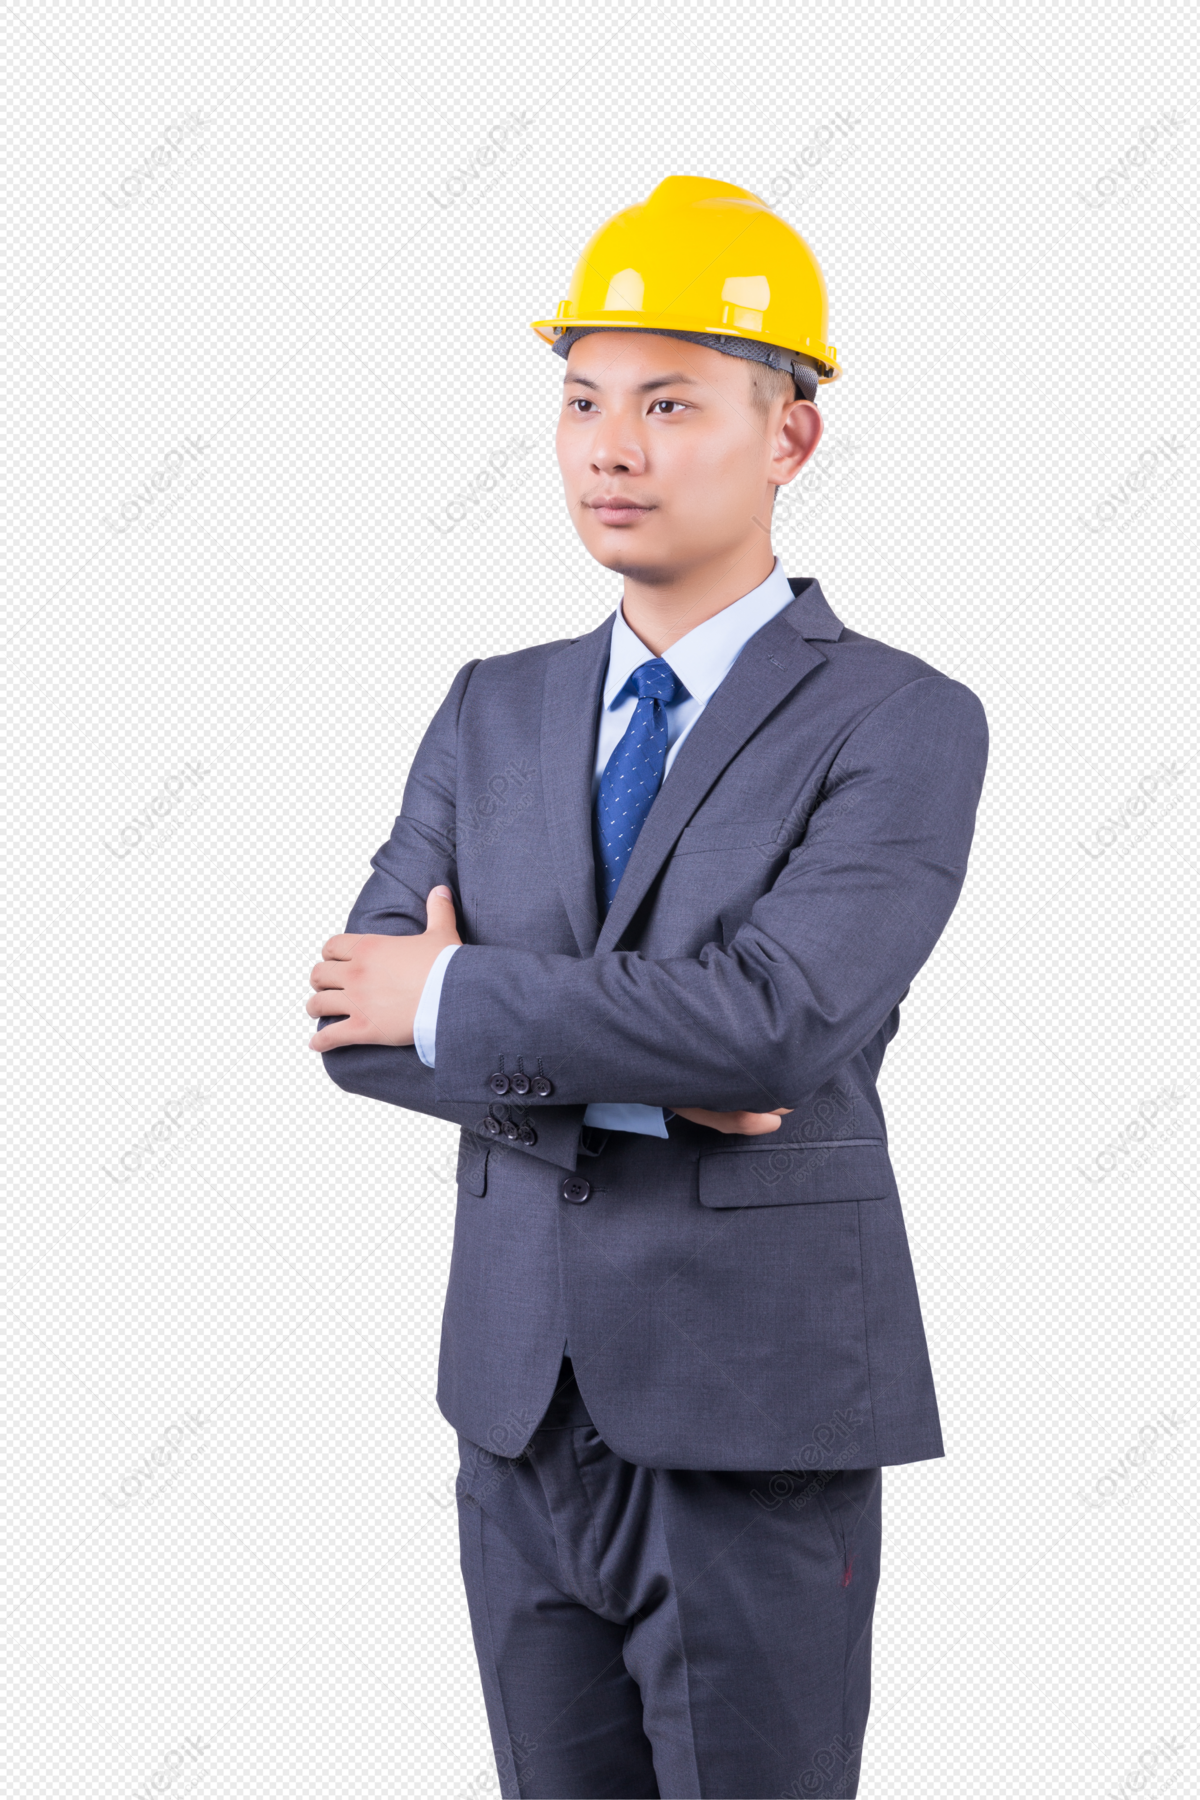 Construction PNG Transparent Image And Clipart Image For Free Download ...